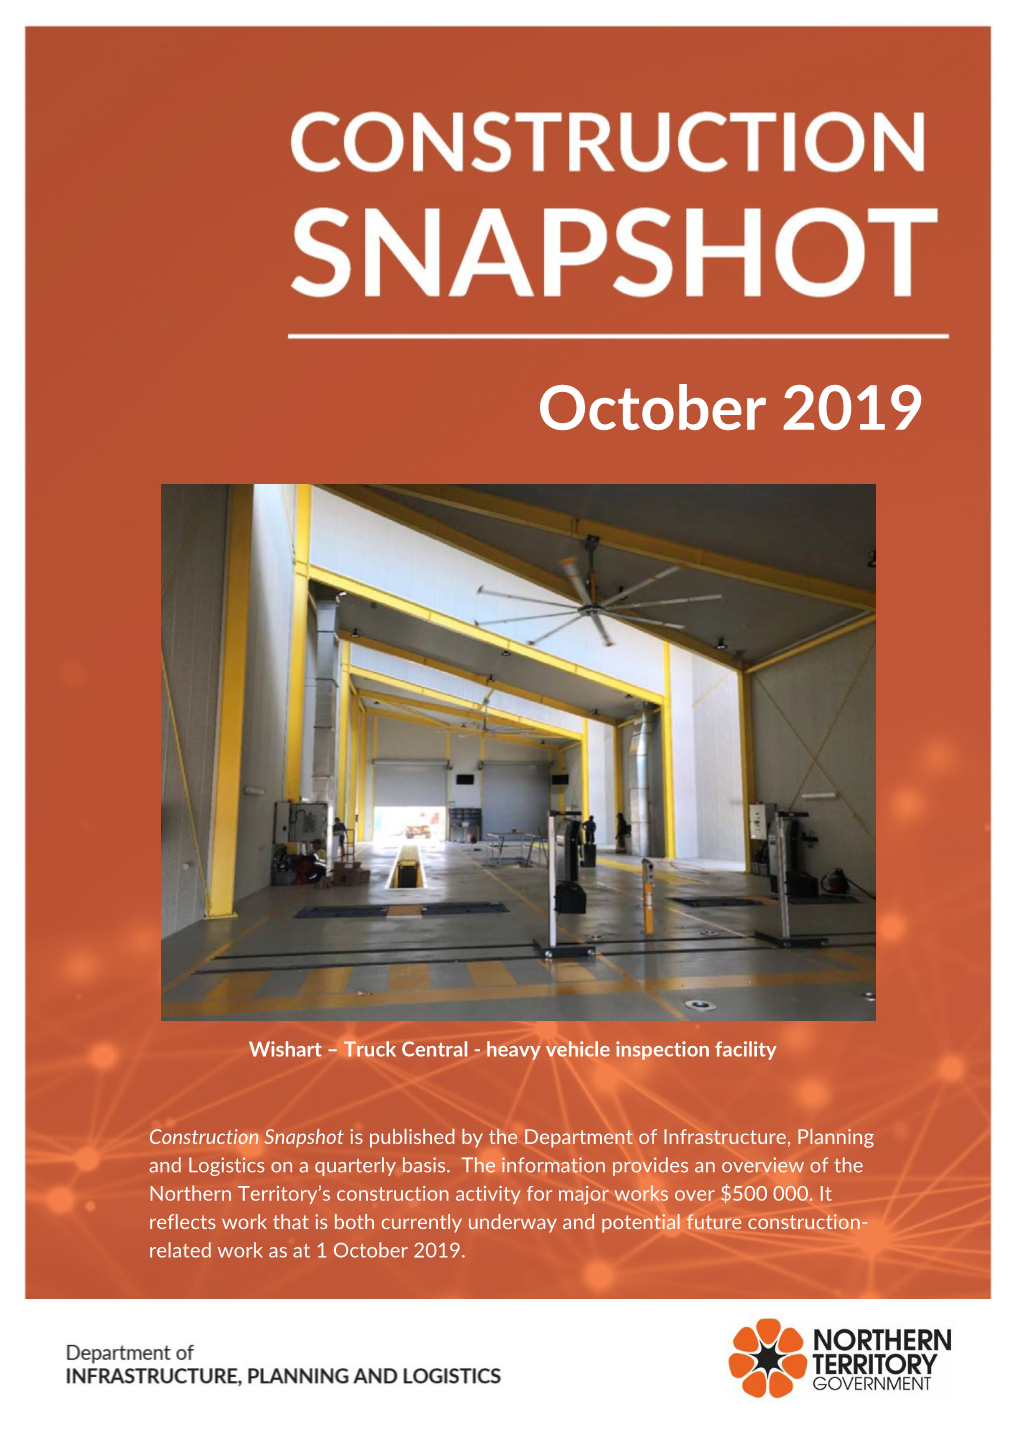 Construction Snapshot October 2019 Edition Is Published by the Northern Territory Government’S Department of Infrastructure, Planning and Logistics